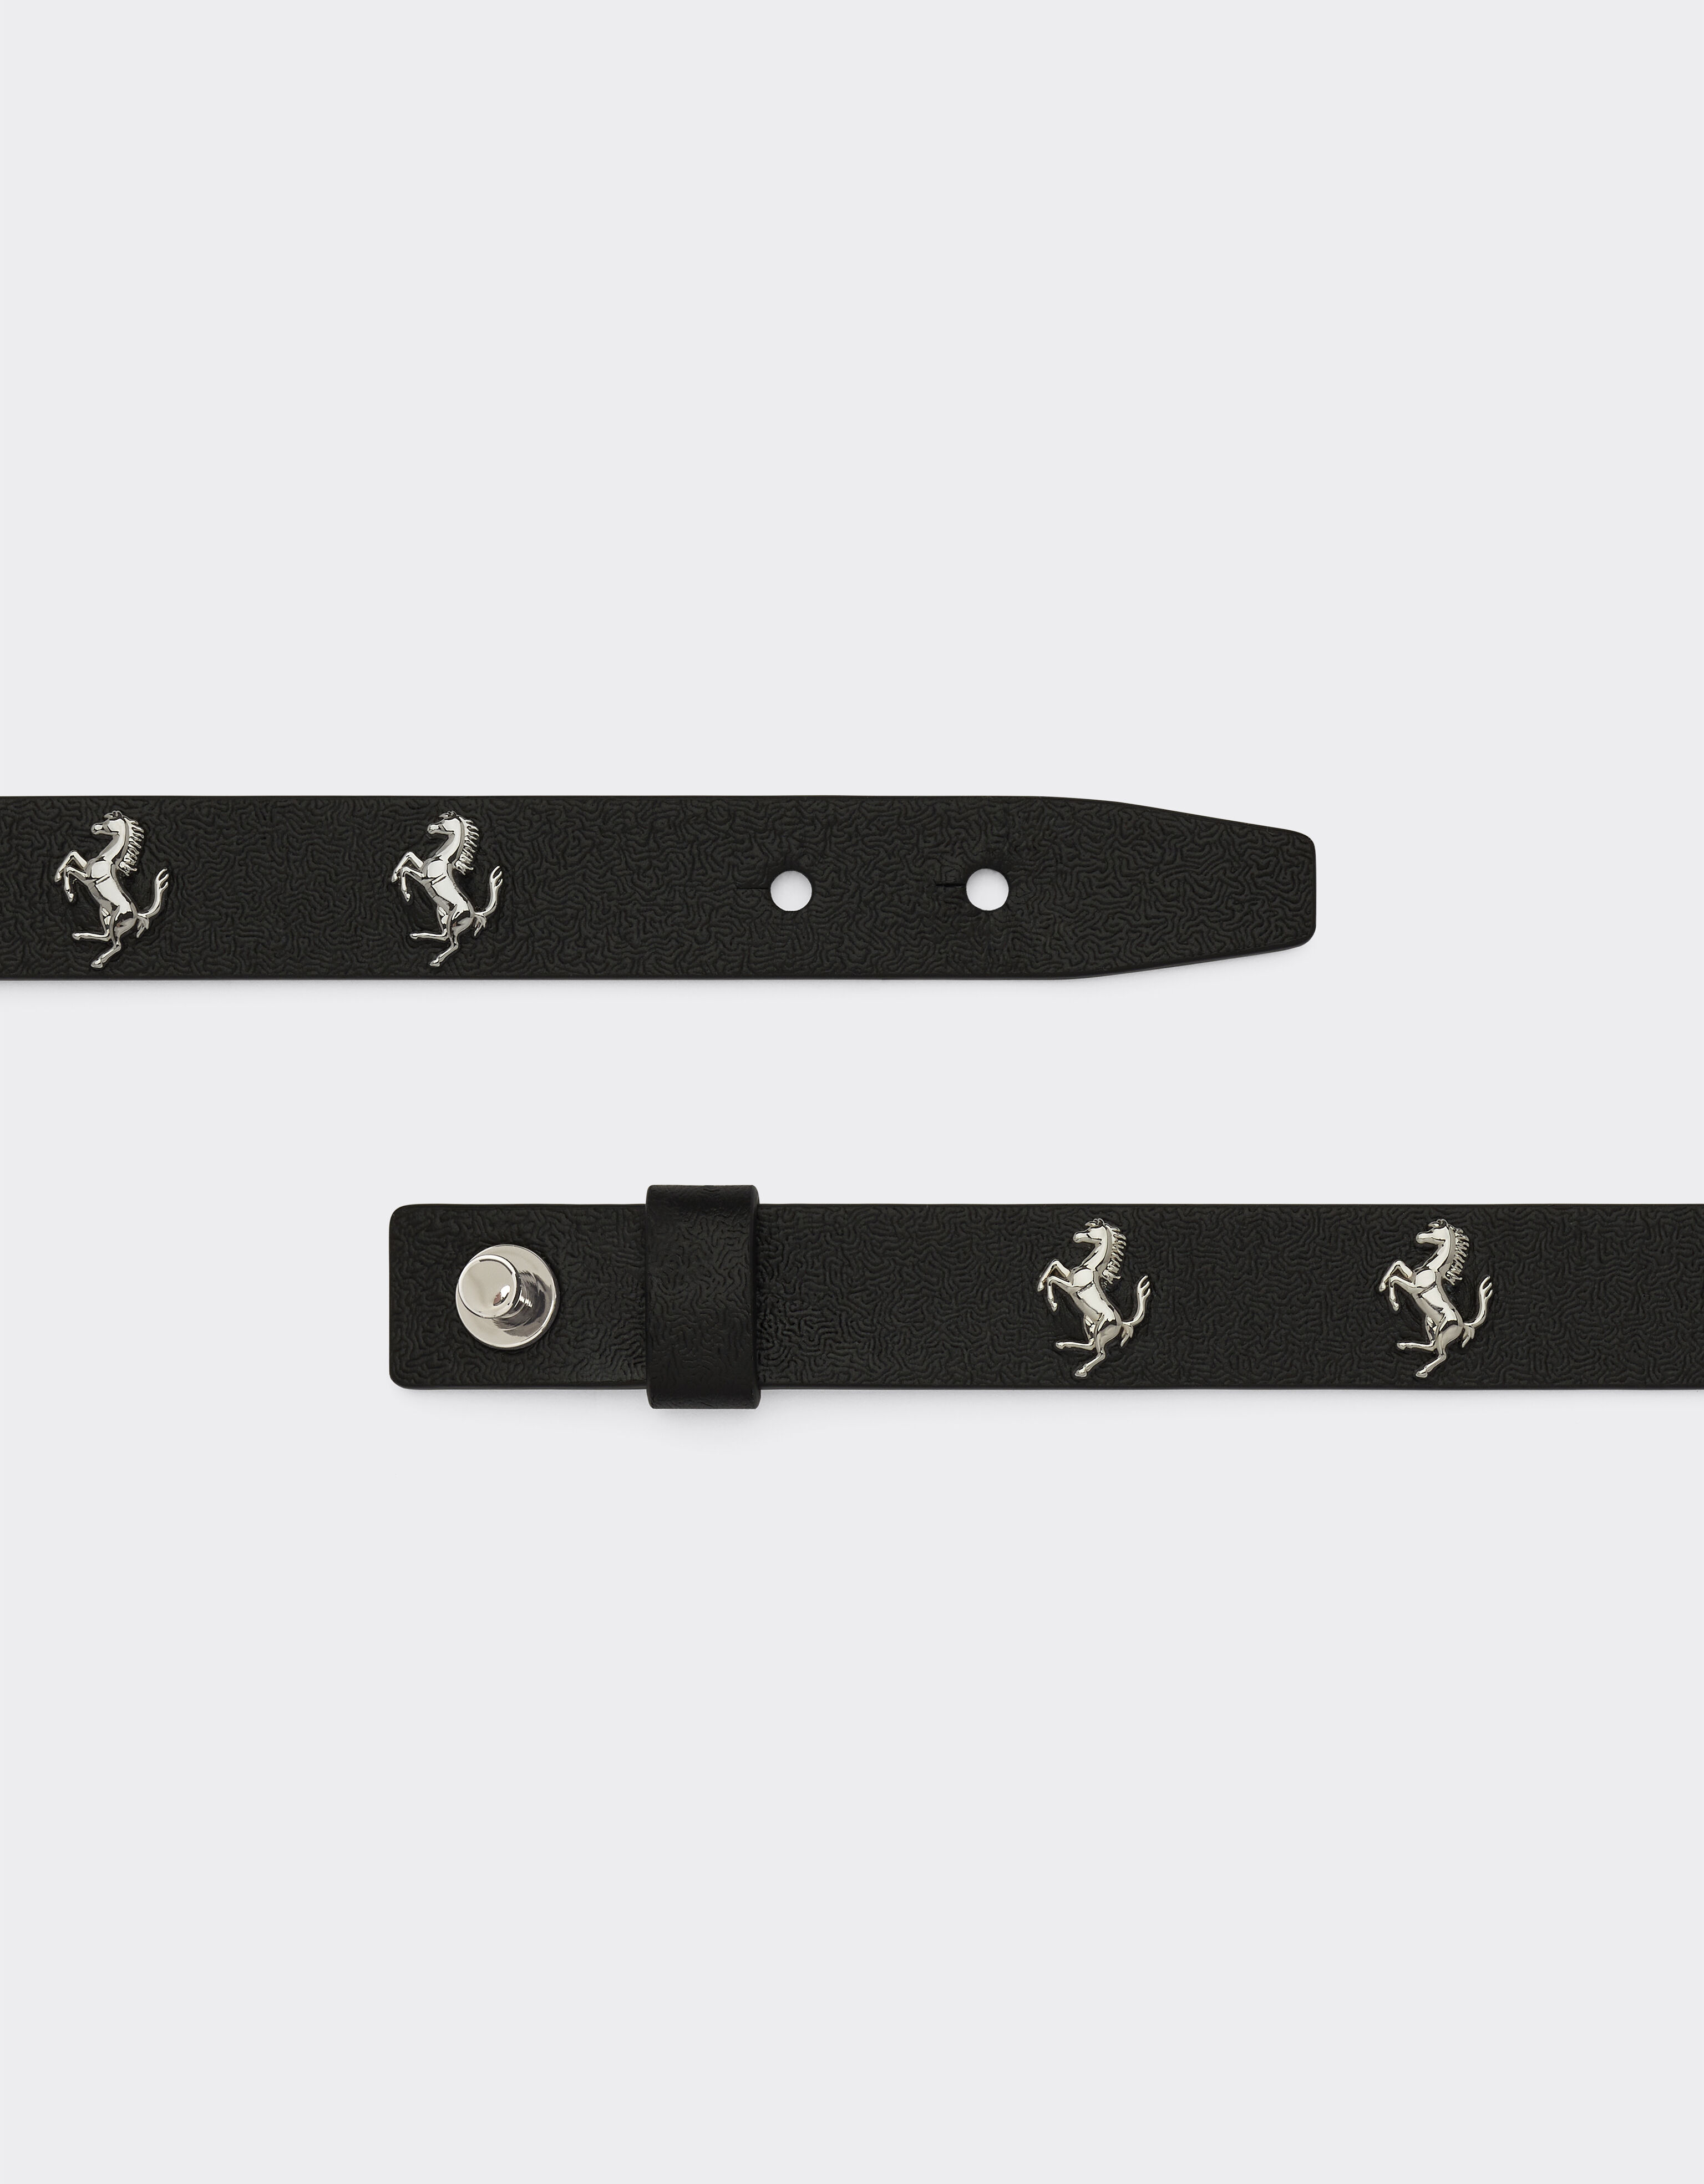 Ferrari Leather bracelet with metal studs featuring the Prancing Horse Black 47427f